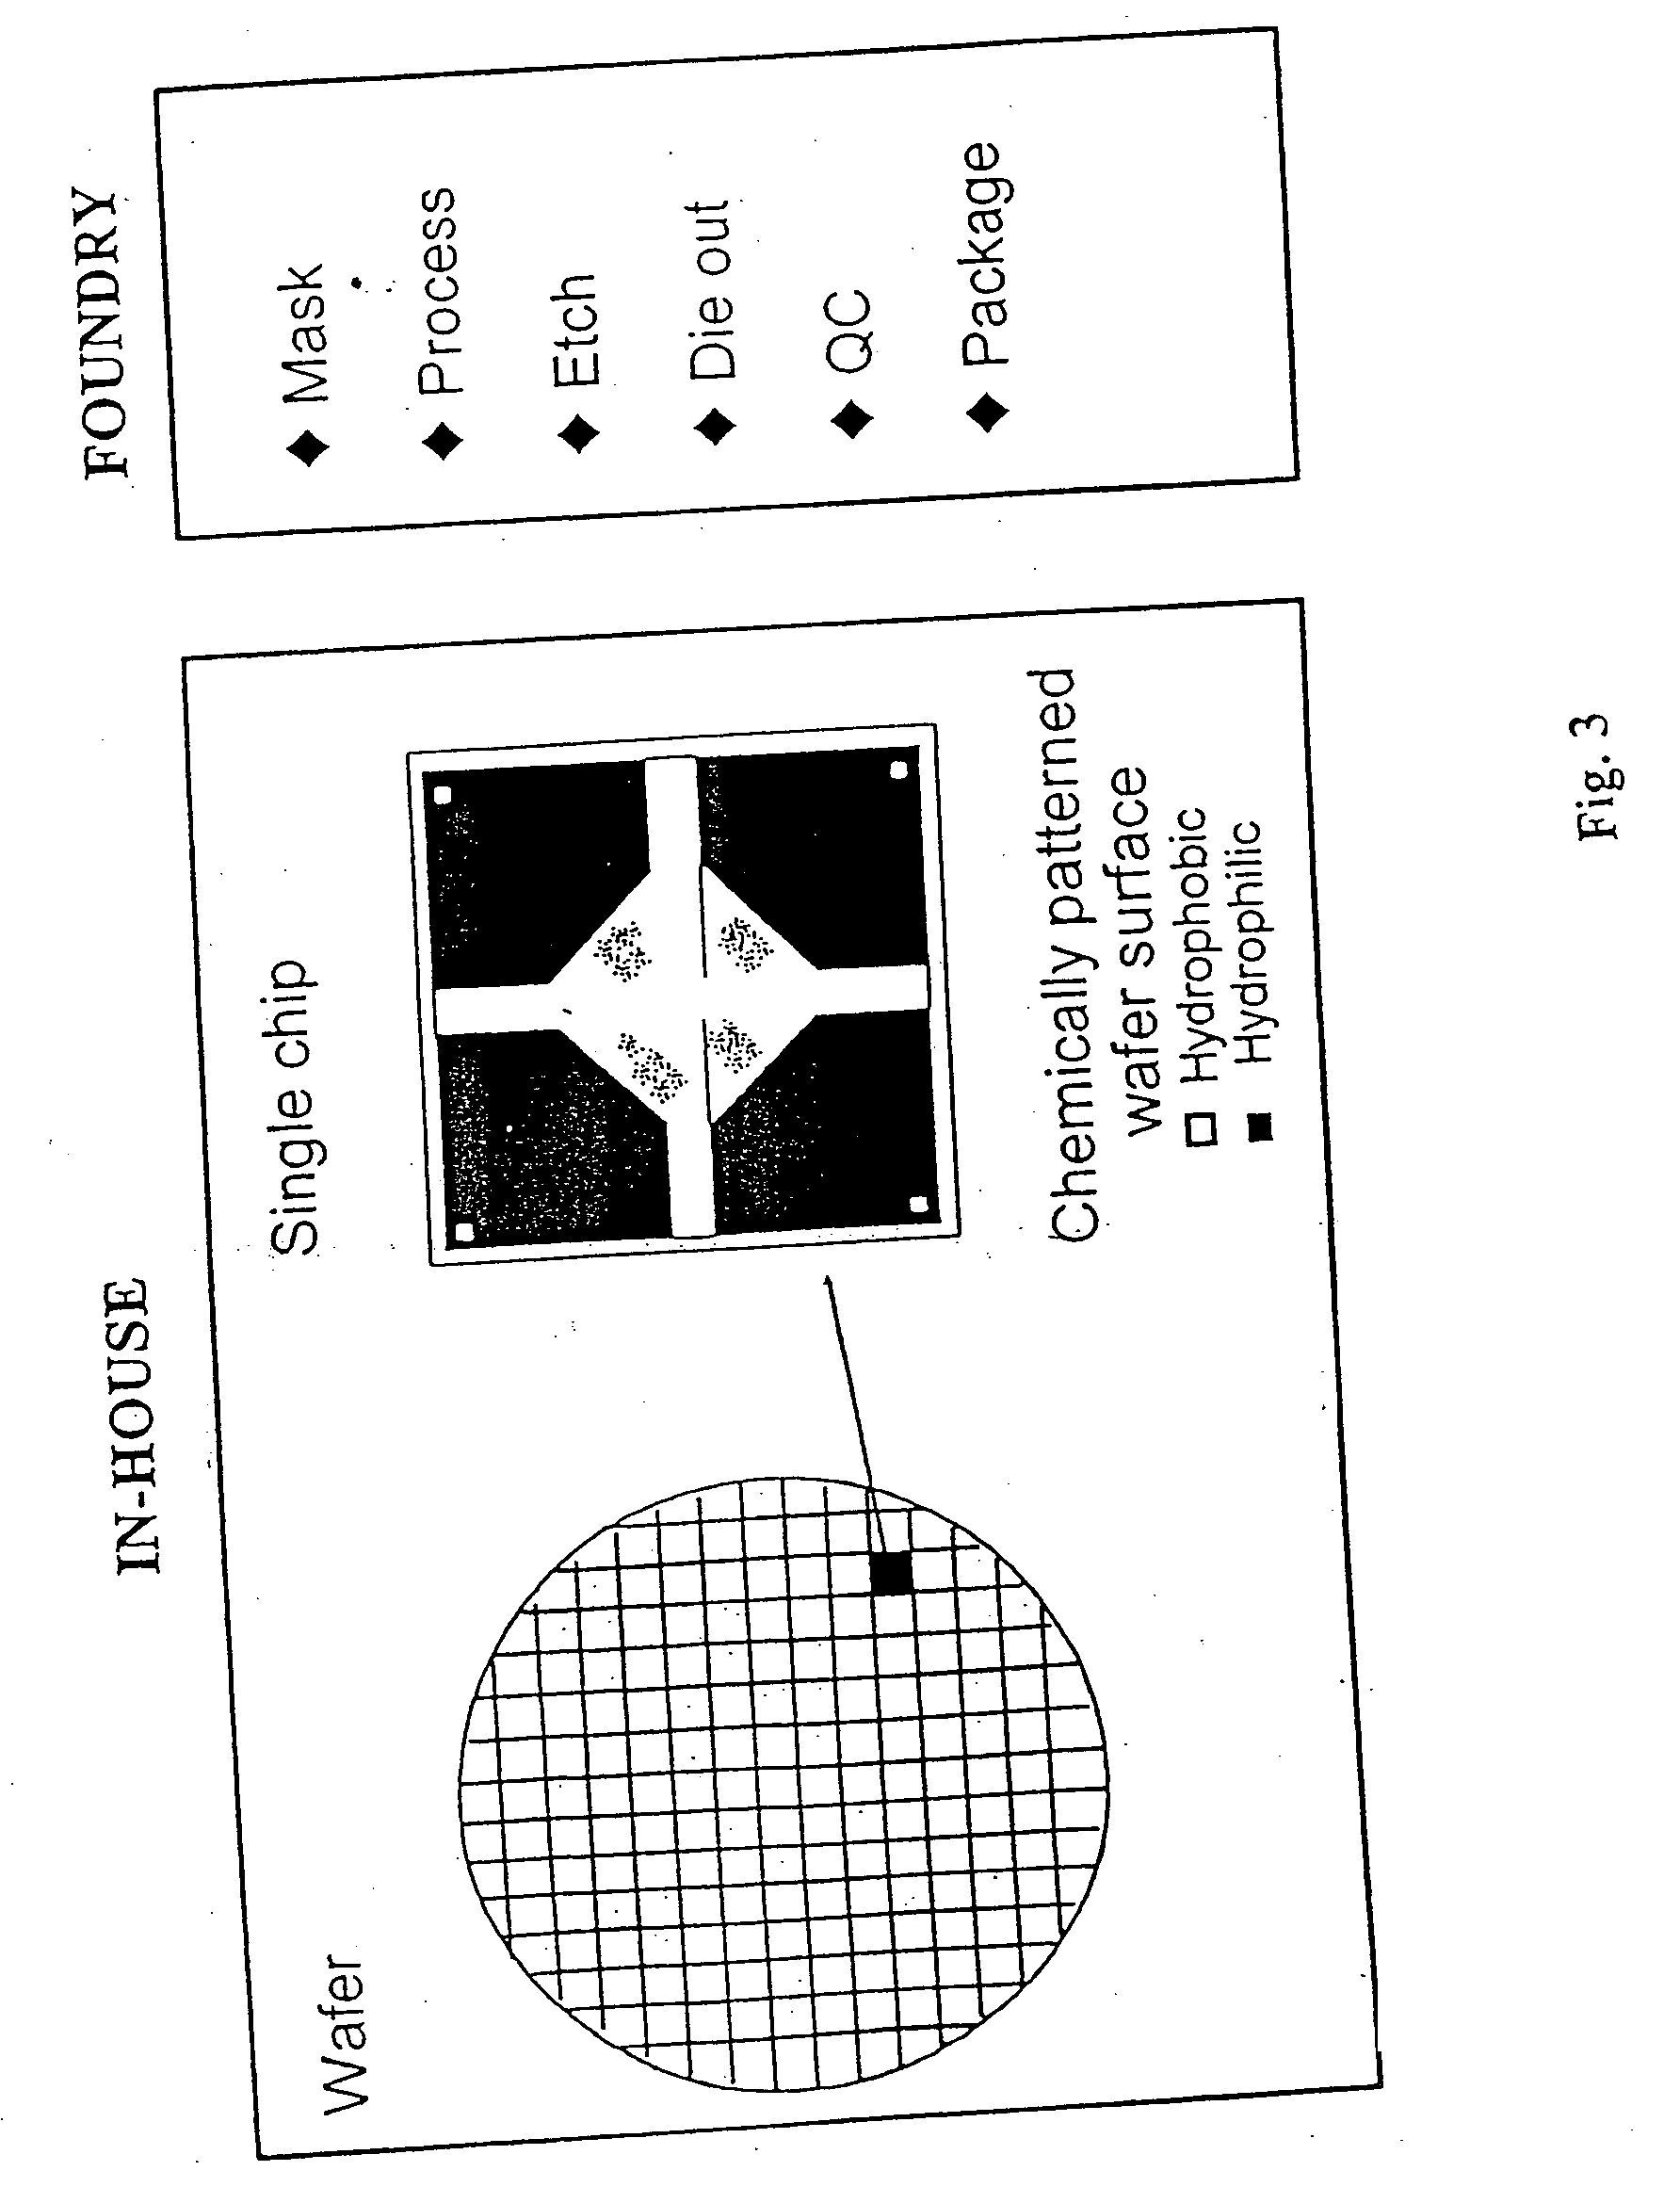 Assembly of arrays on chips segmented from wafers